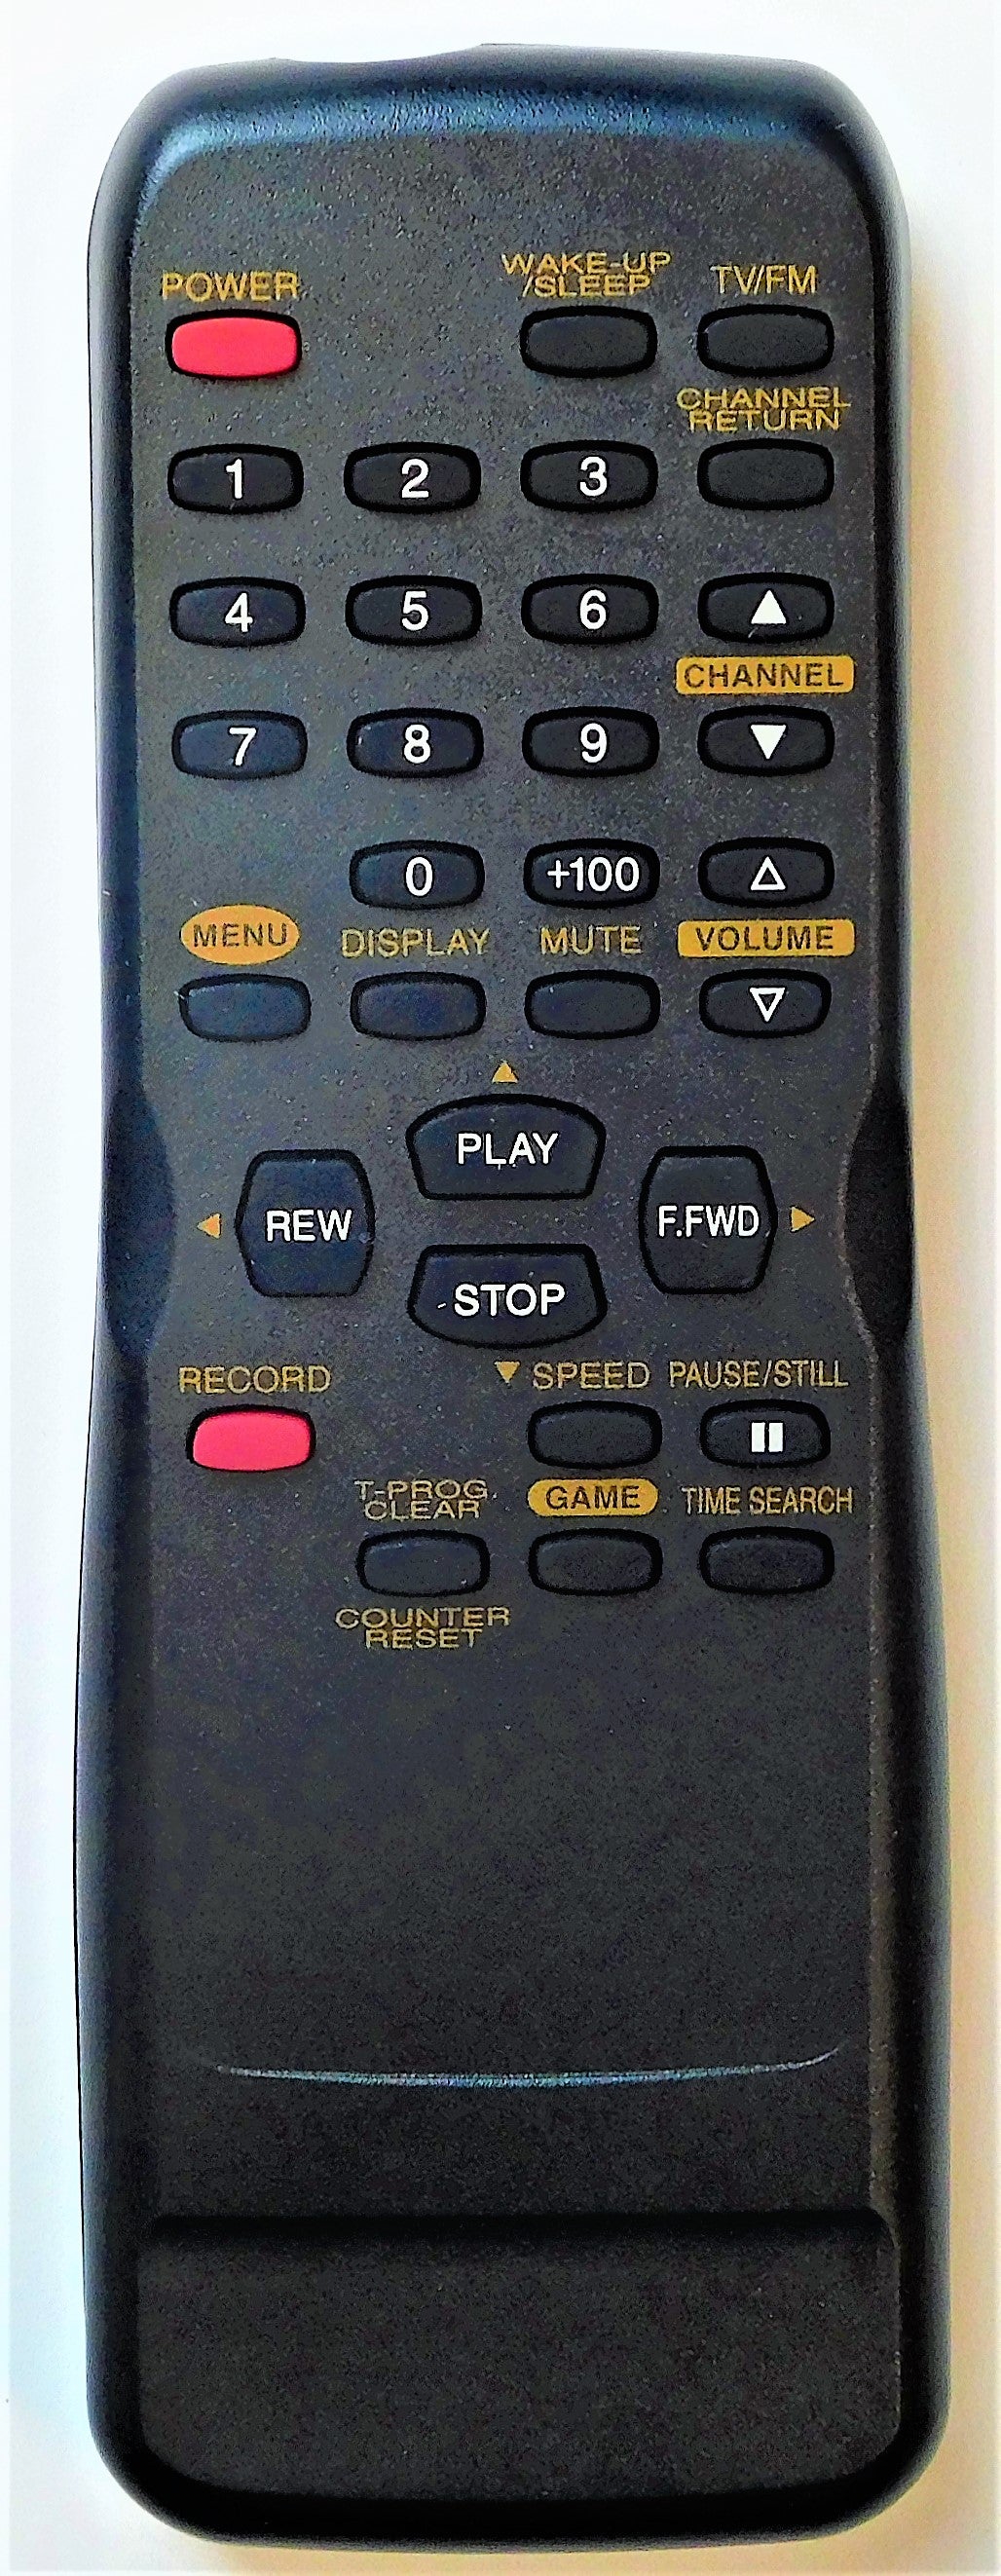 OEM replacement remote control for Sylvania CRT TV NE108UD